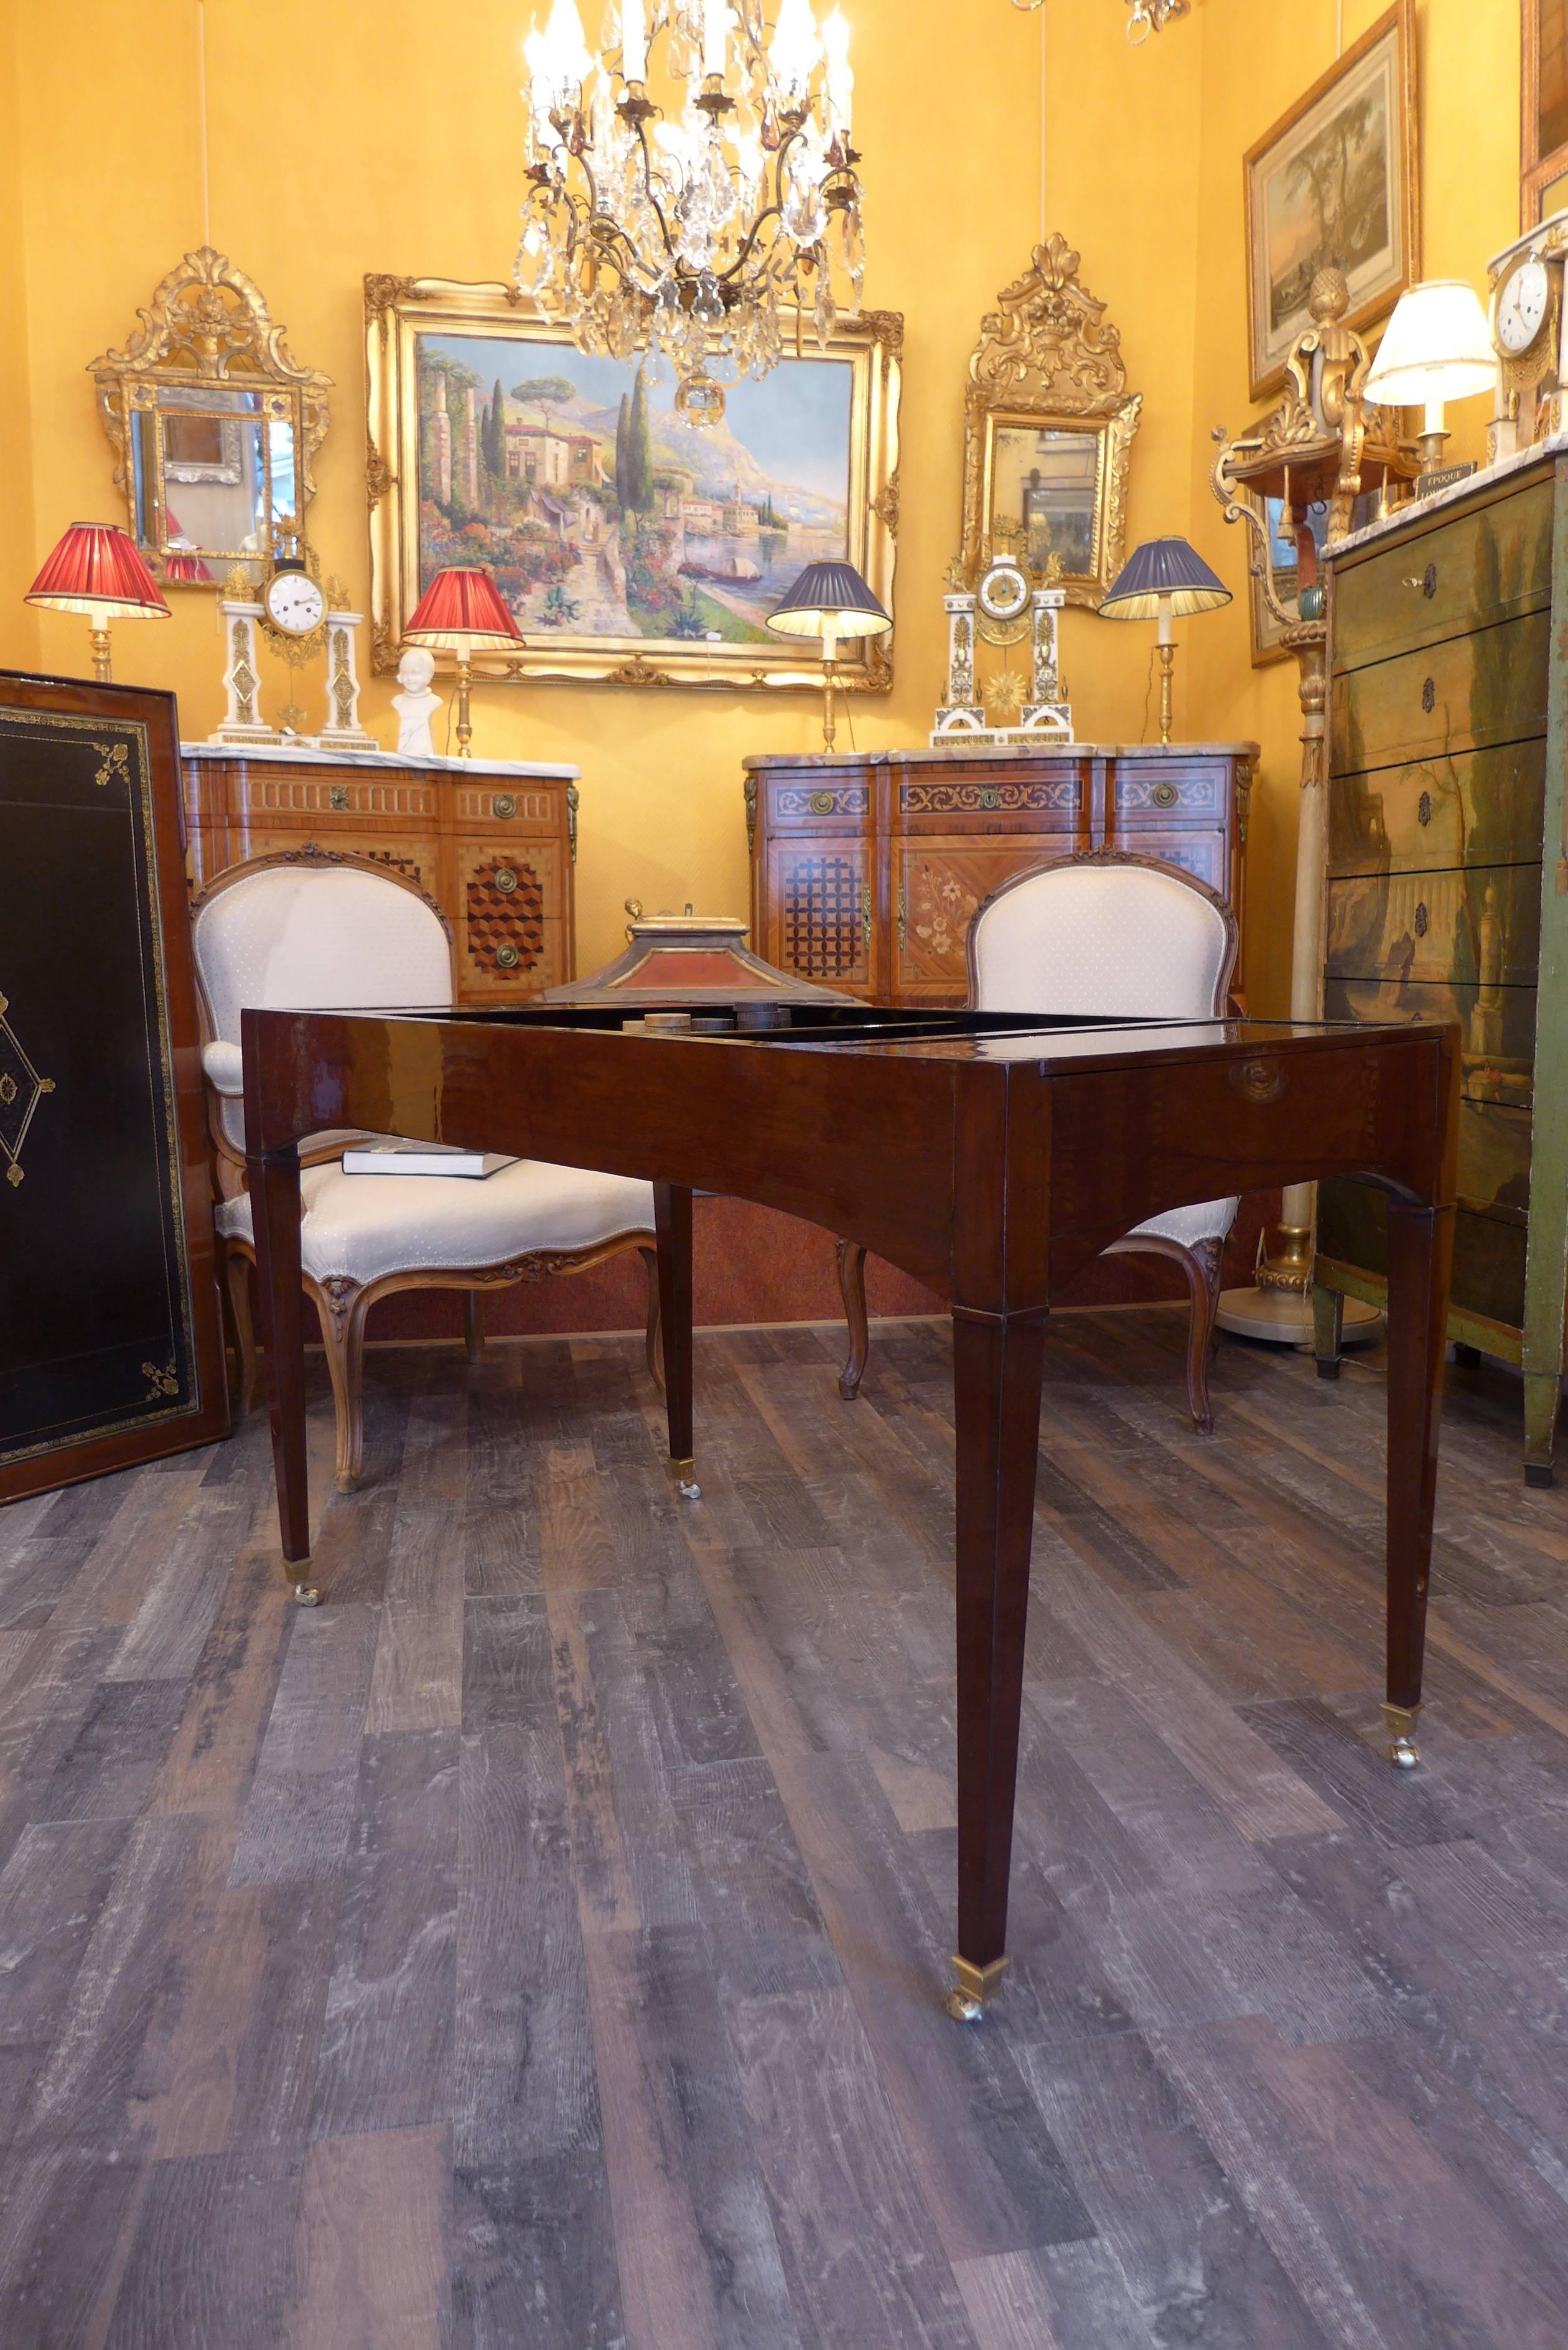 Mahogany French Directoire Period, circa 1795 Reversible Desk and Tric-Trac Game Table